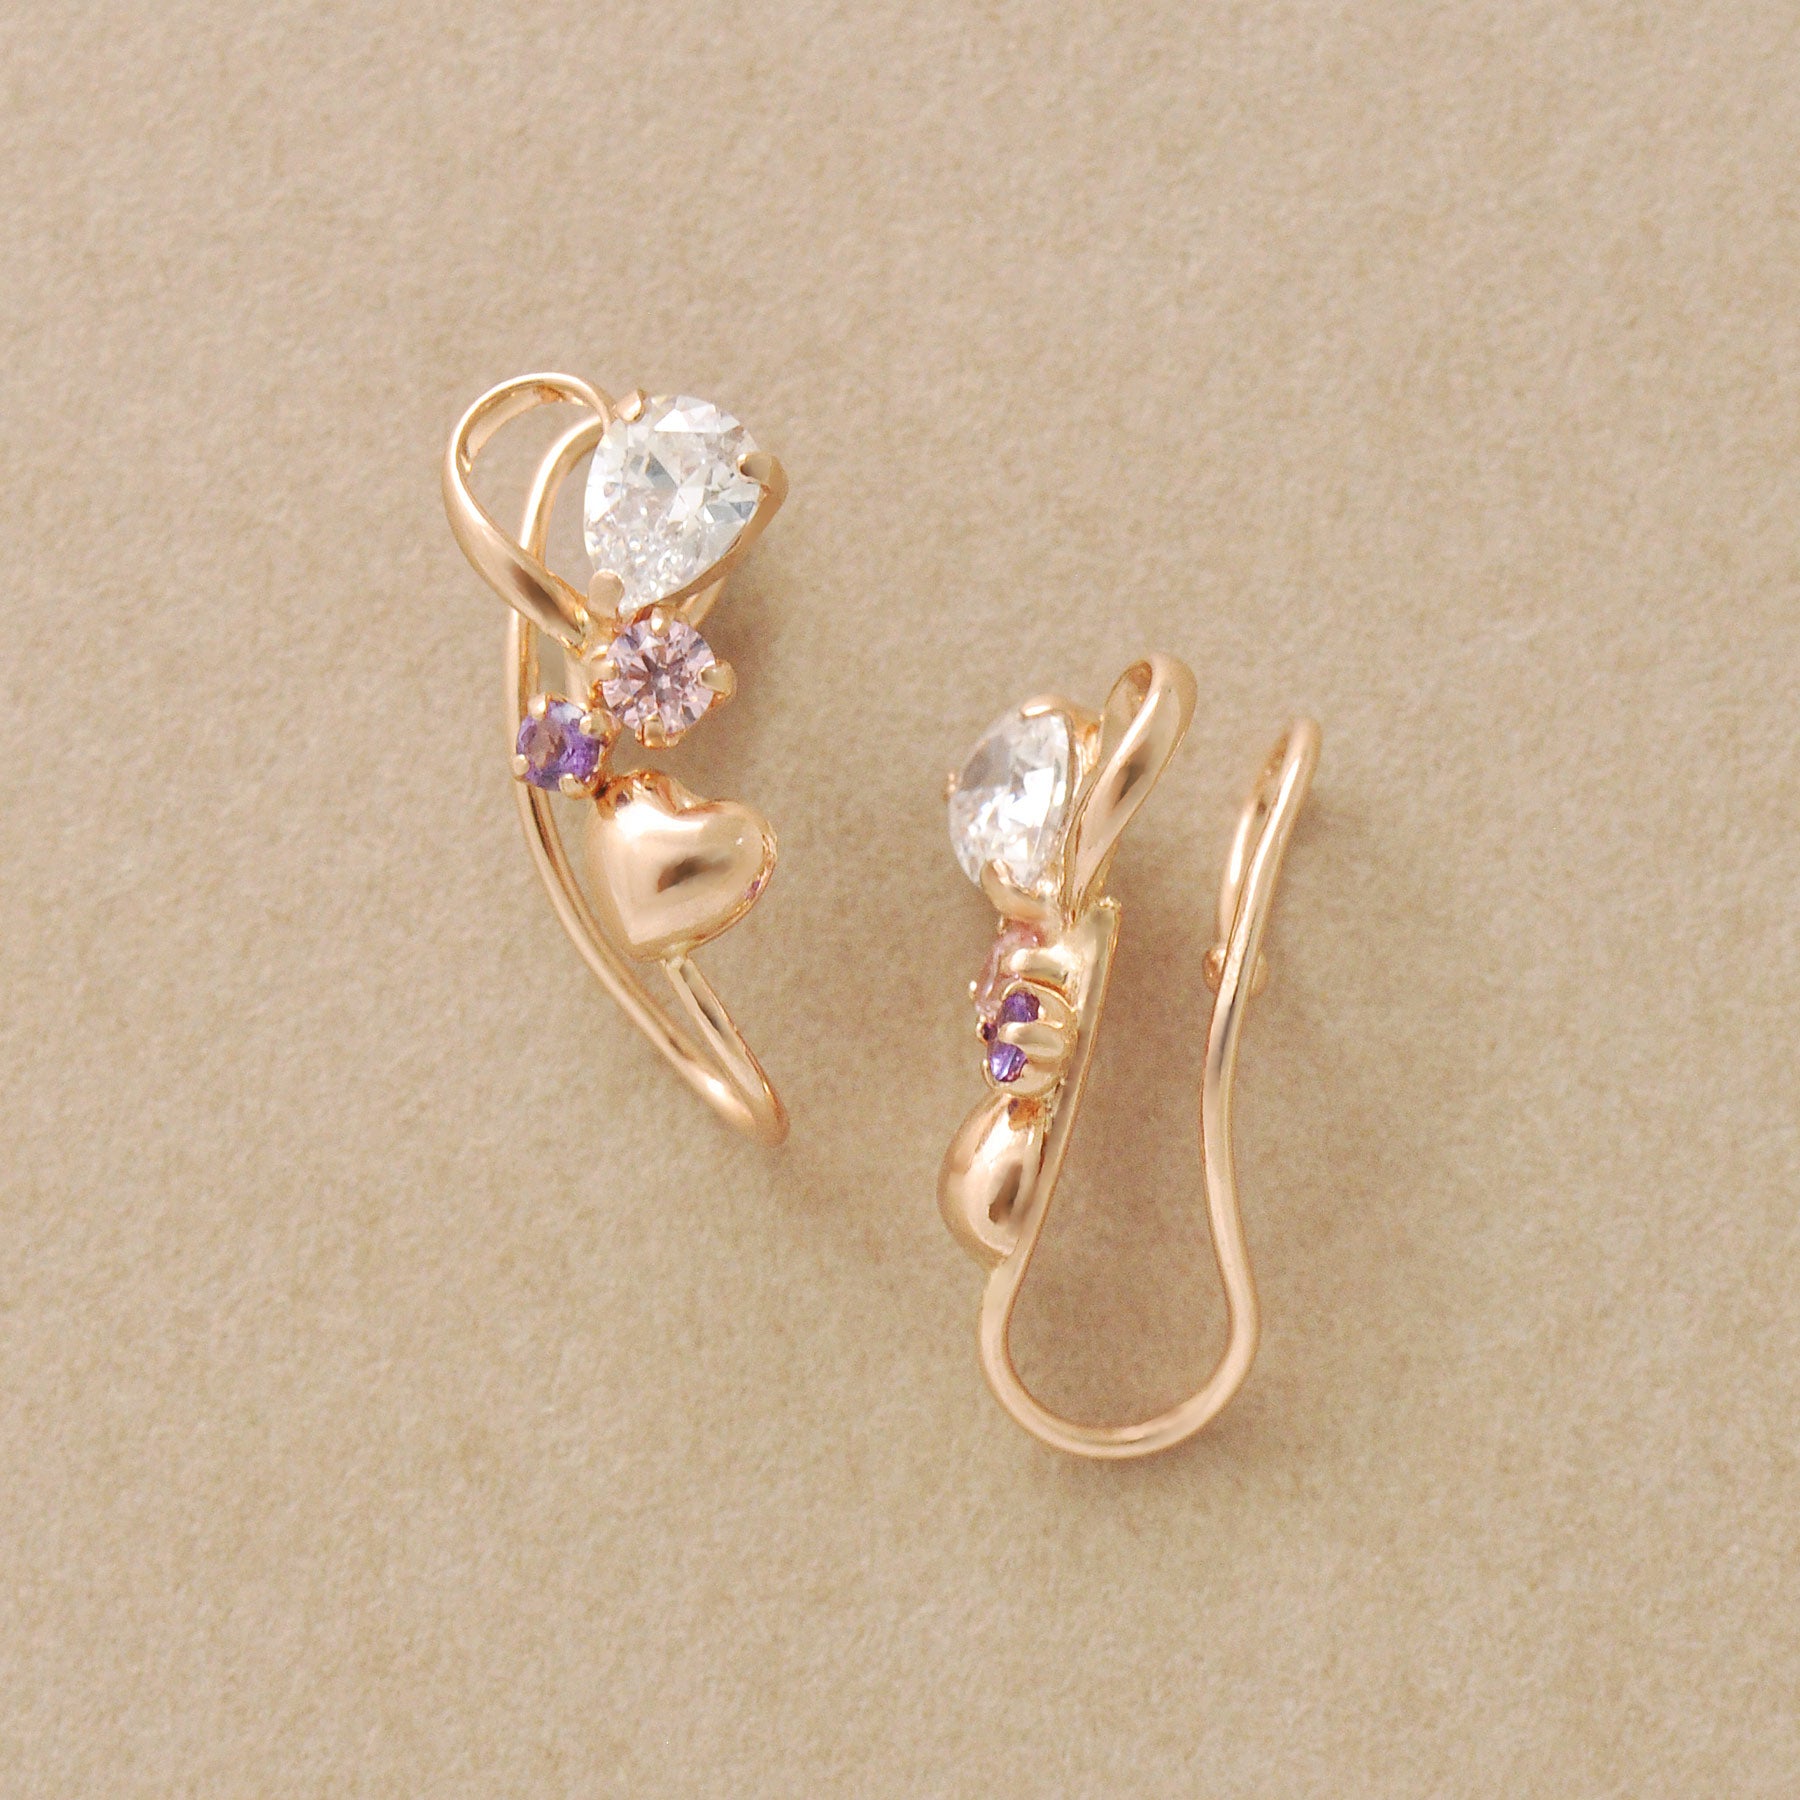 [Airy Clip-On Earrings] 10K Double Heart Earrings (Rose Gold) - Product Image